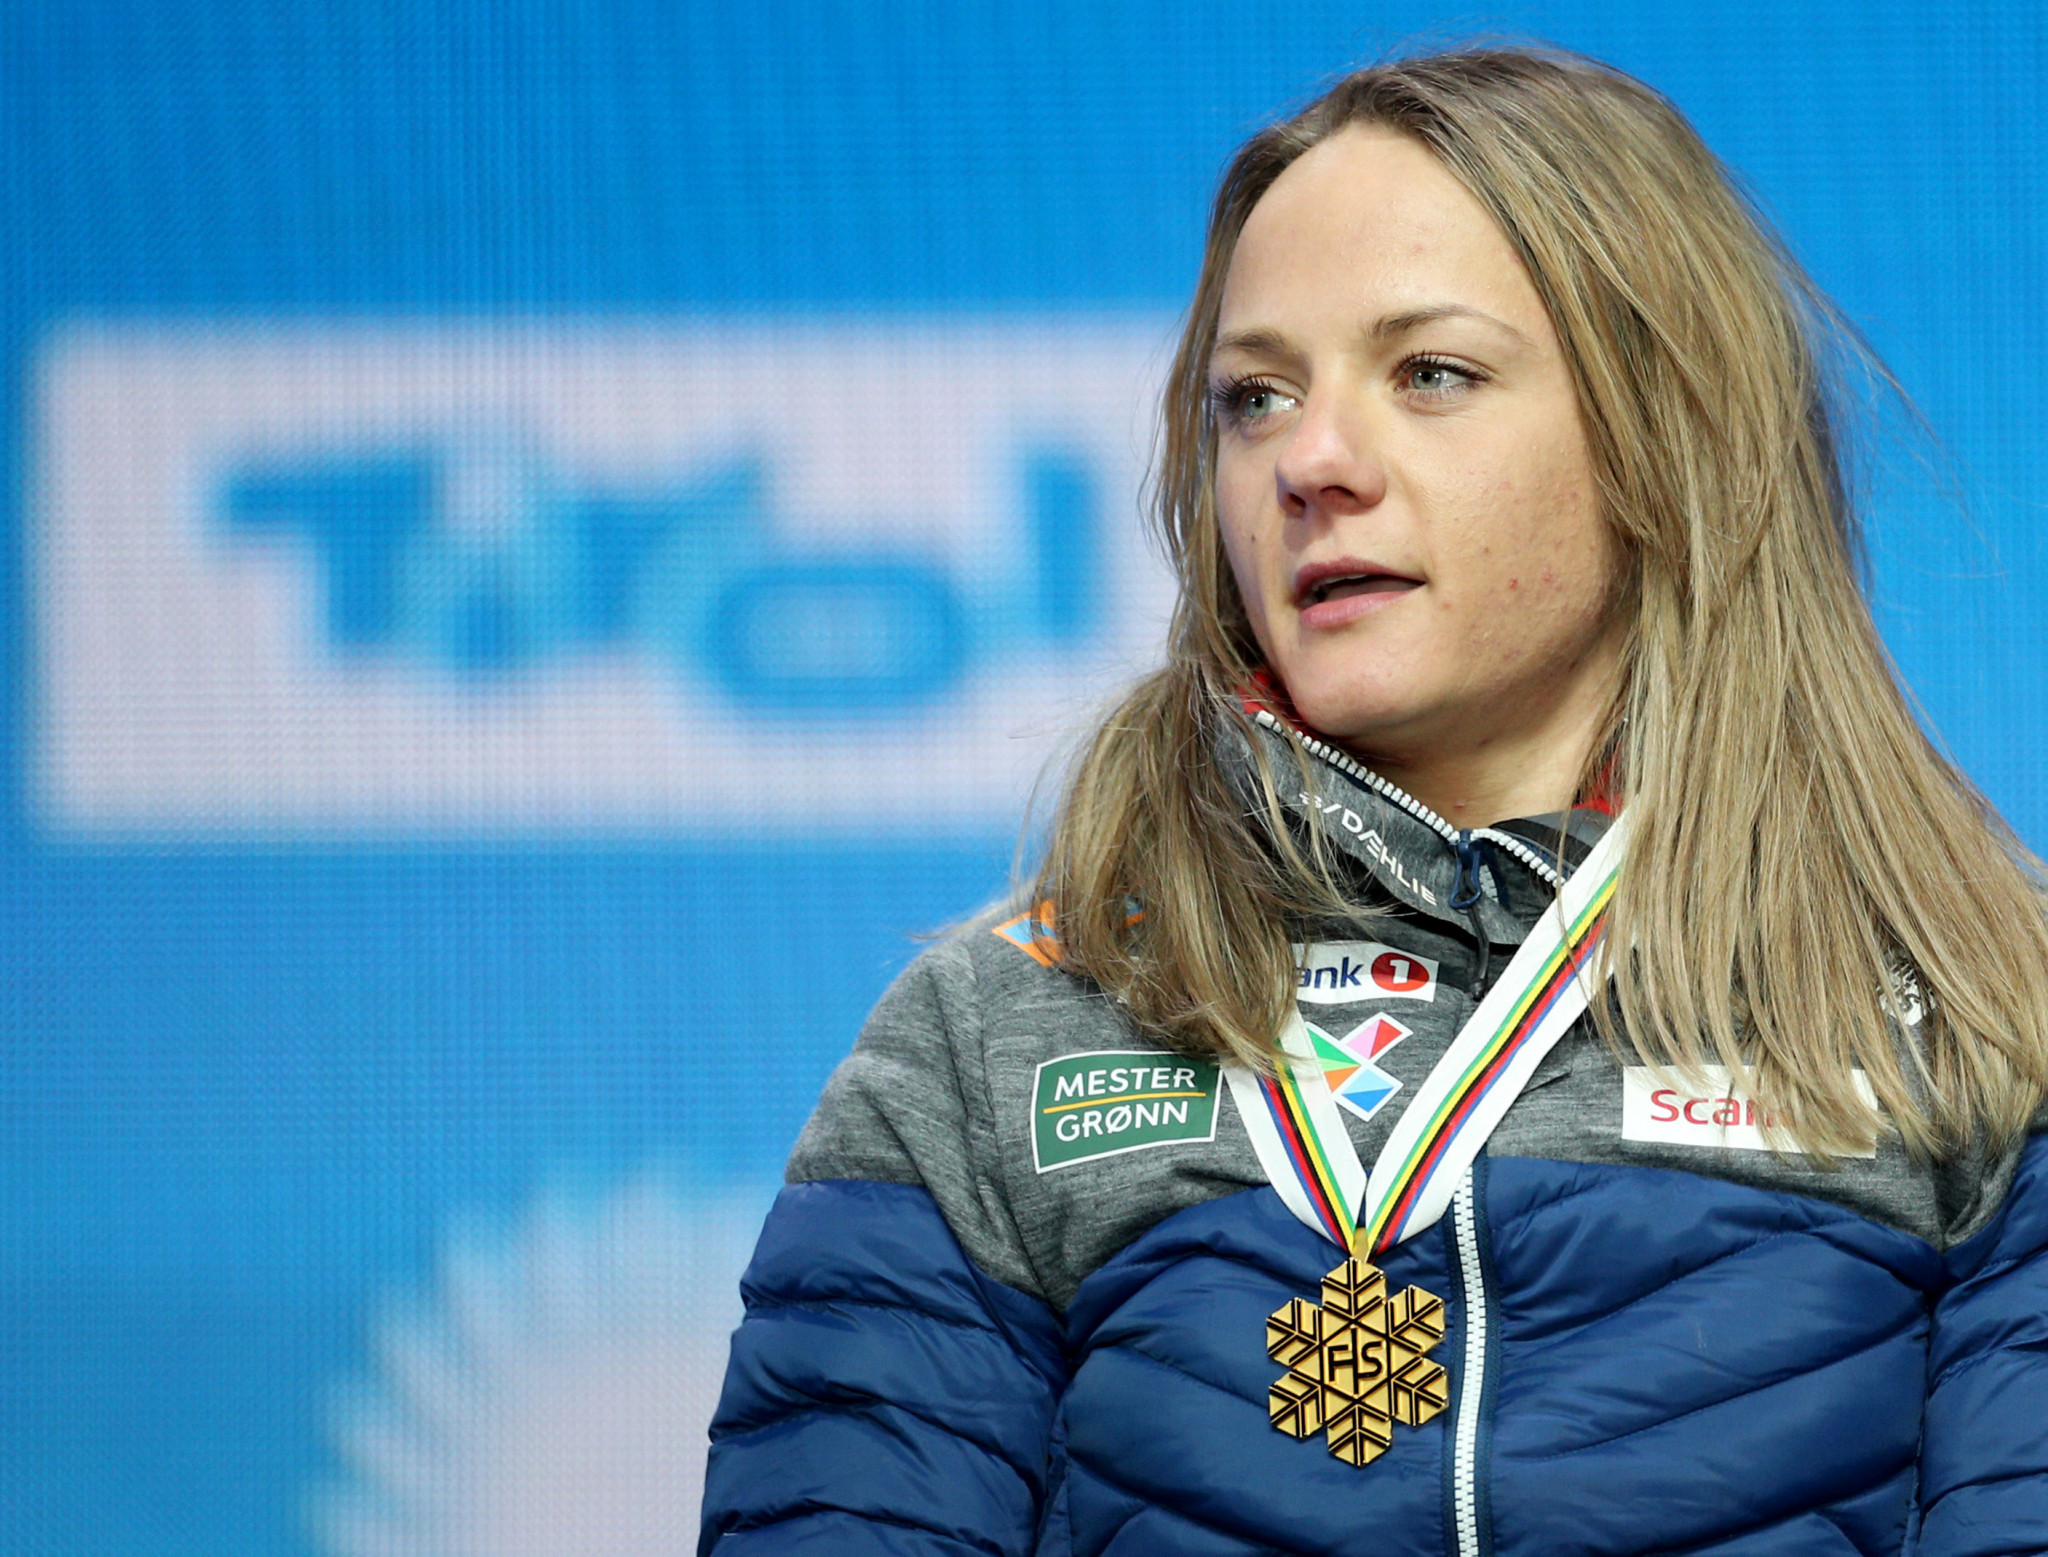 His compatriot Maiken Caspersen Falla received her medal for winning the women's event ©Getty Images